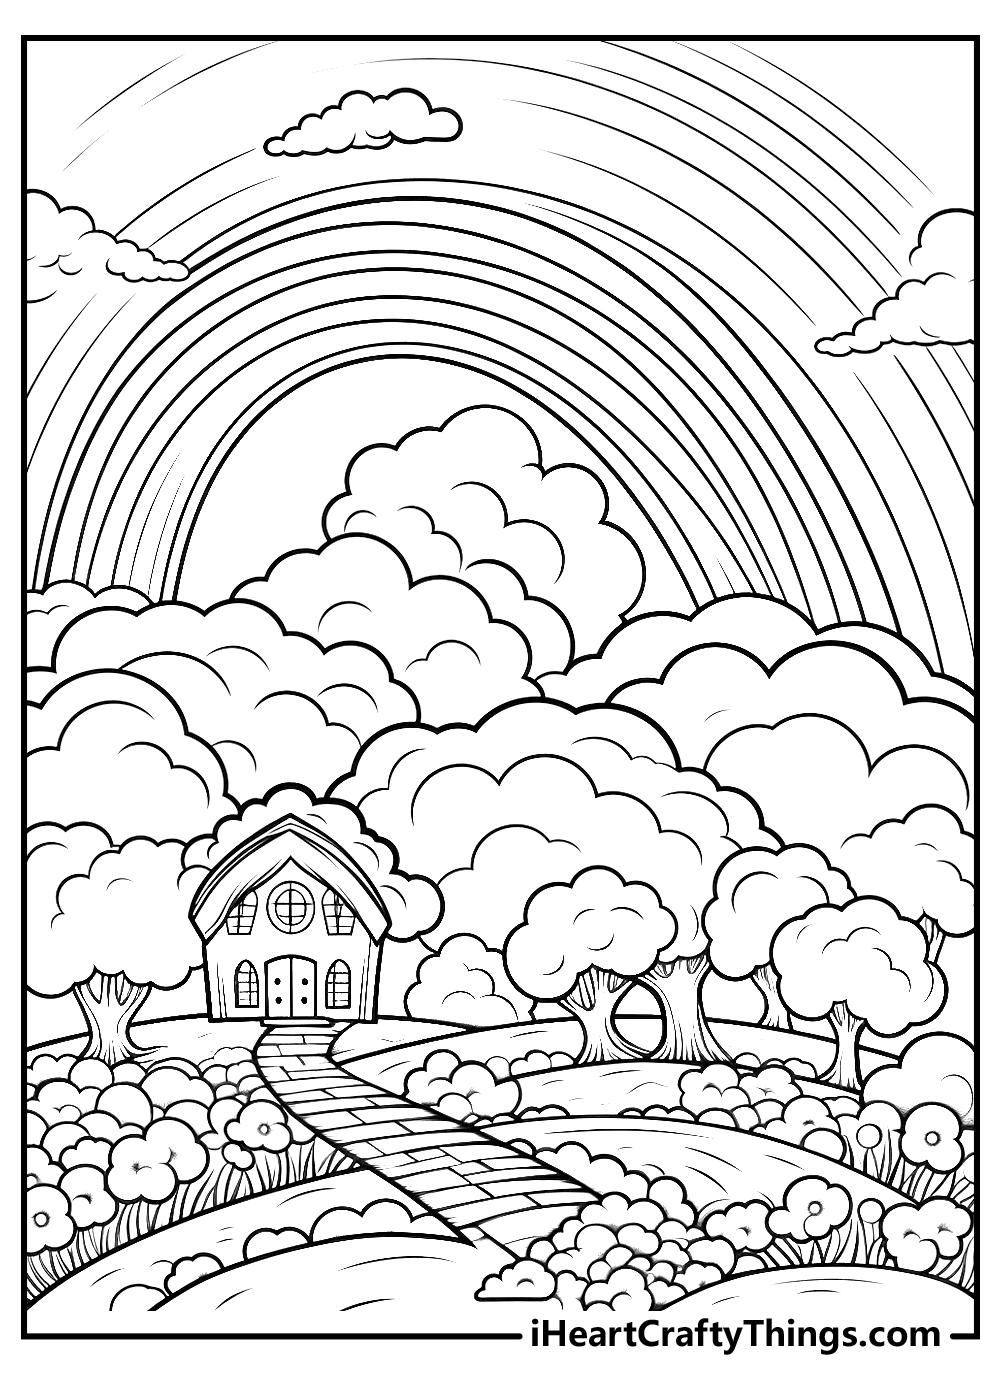 rainbow coloring sheet free download